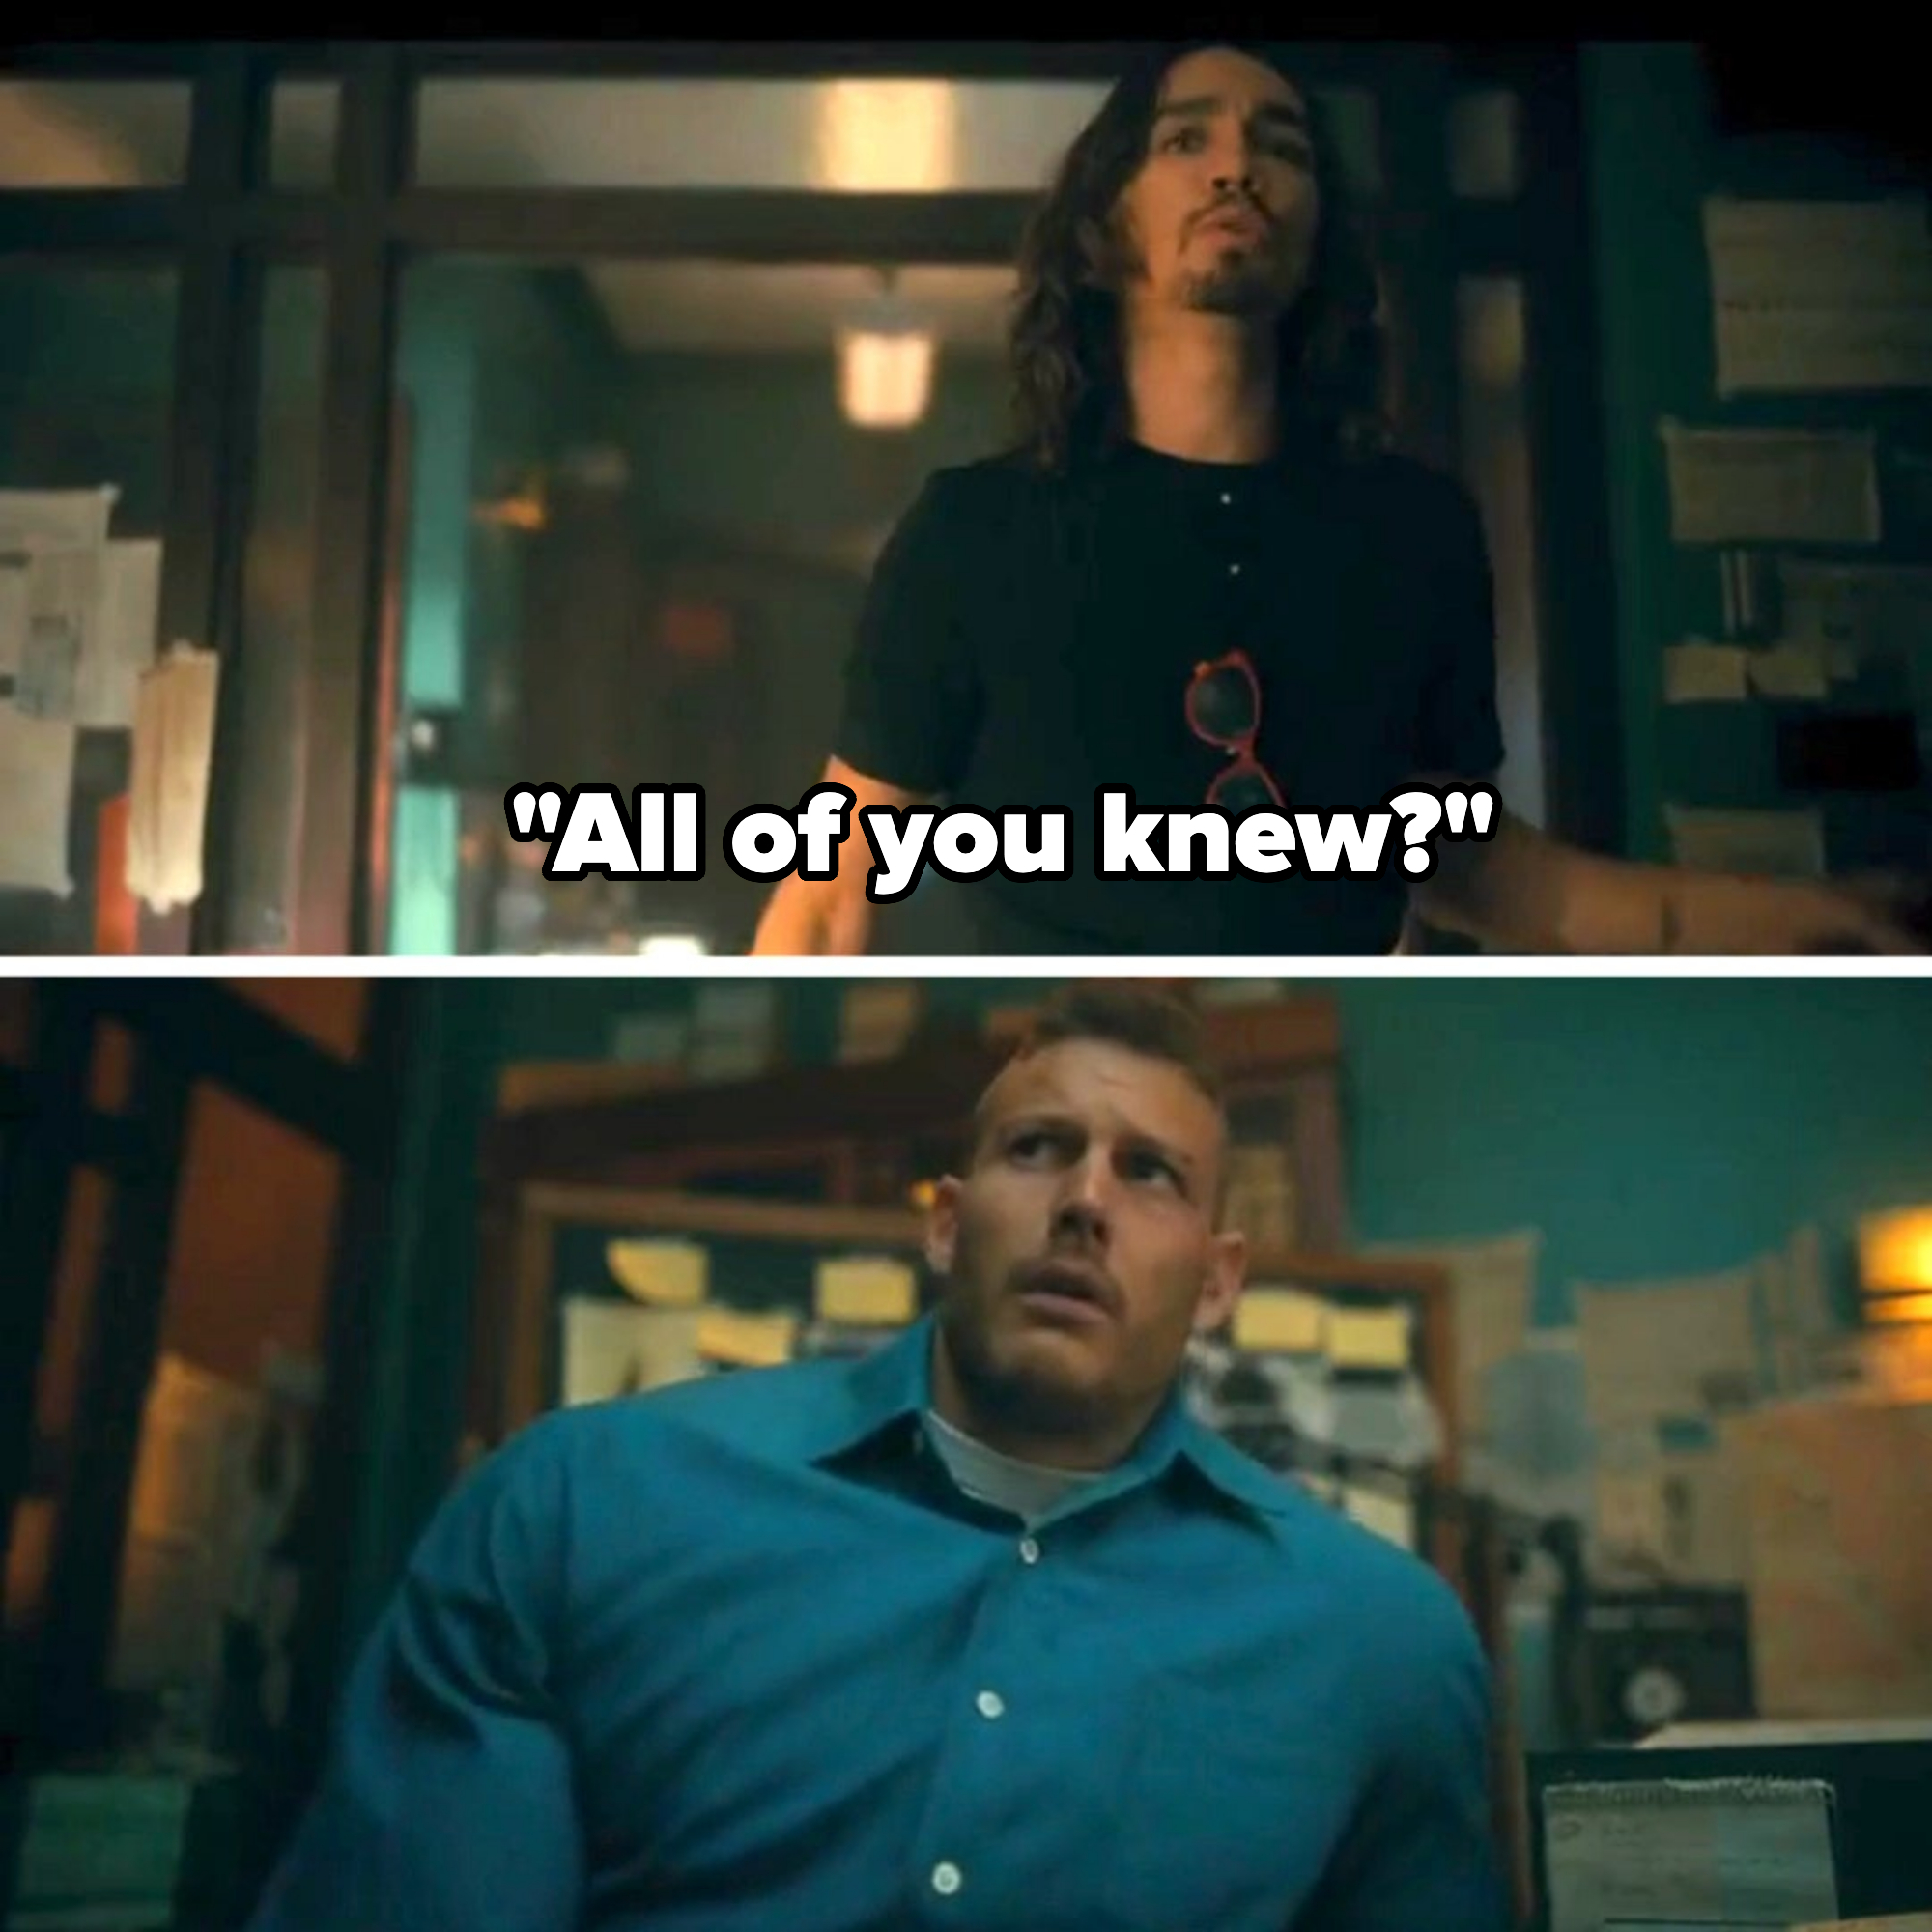 Scene from &quot;The Umbrella Academy&quot; showing characters Klaus Hargreeves (upper) looking concerned and Luther Hargreeves (lower) sitting with a worried expression